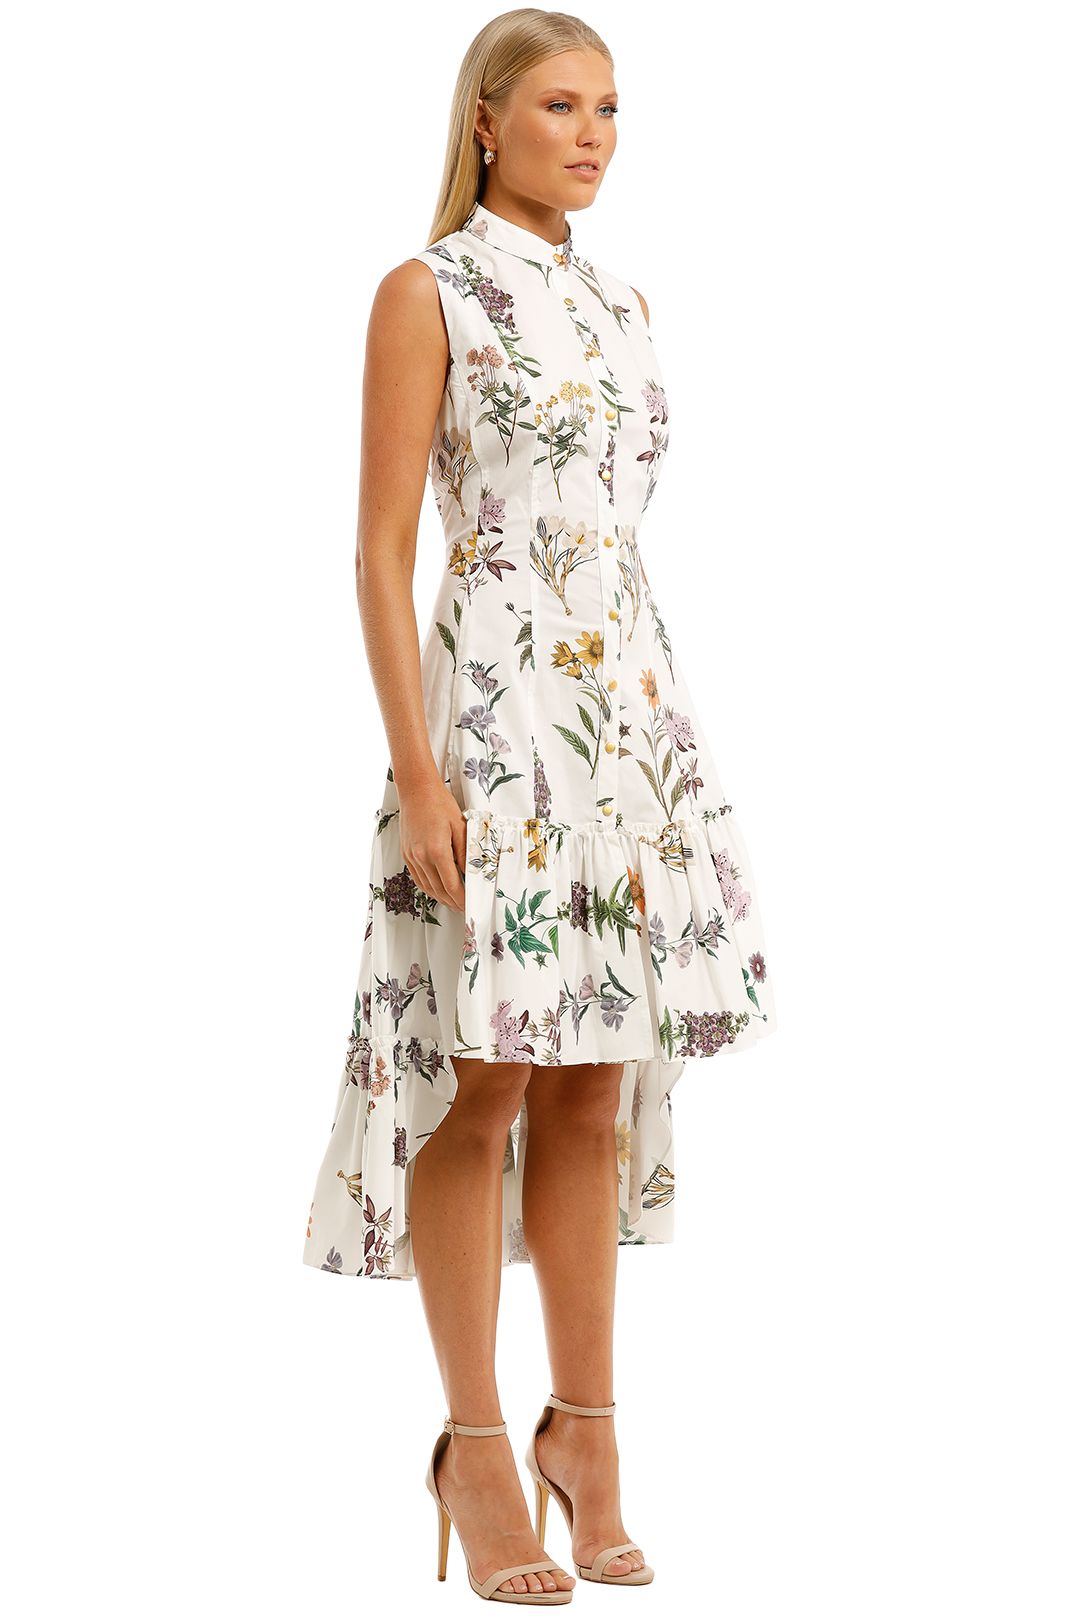 Moss-and-Spy-Donna-Sleeveless-Dress-Ivory-Floral-Side